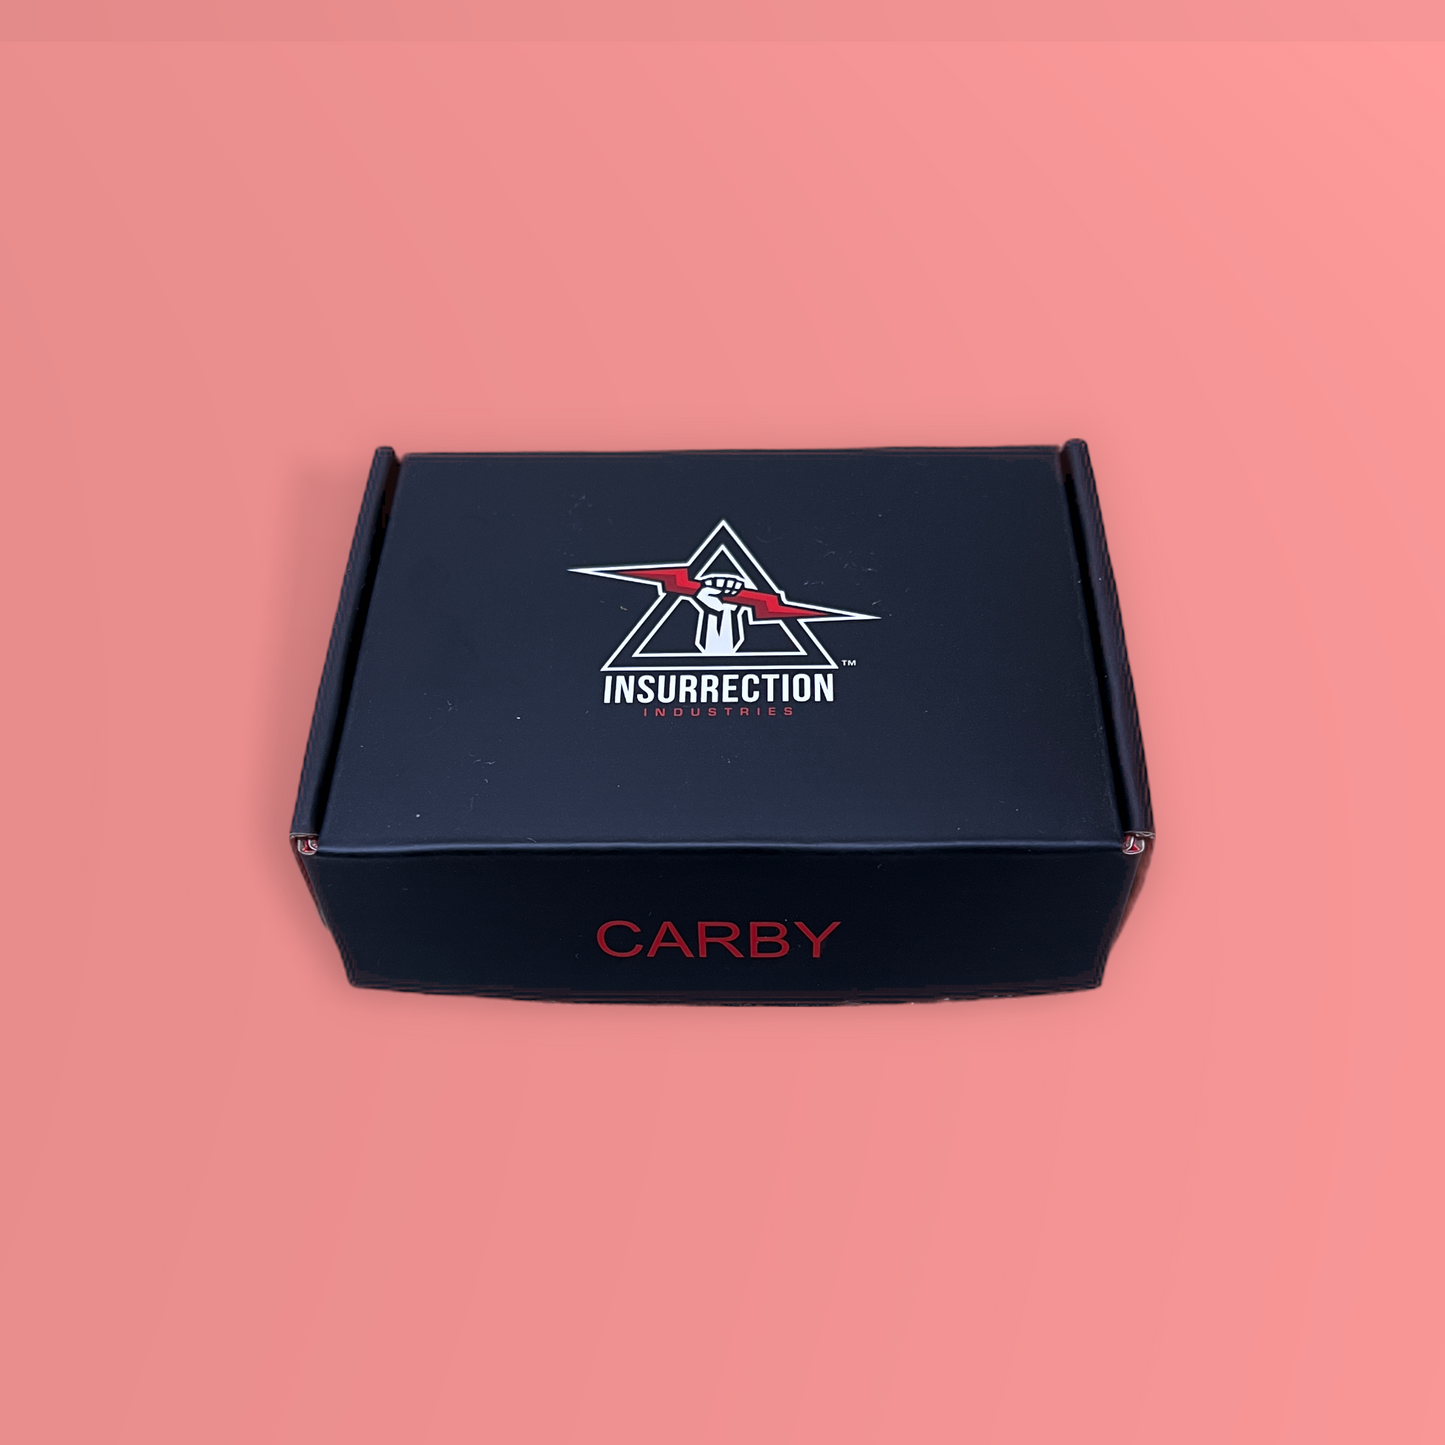 CARBY for GameCube